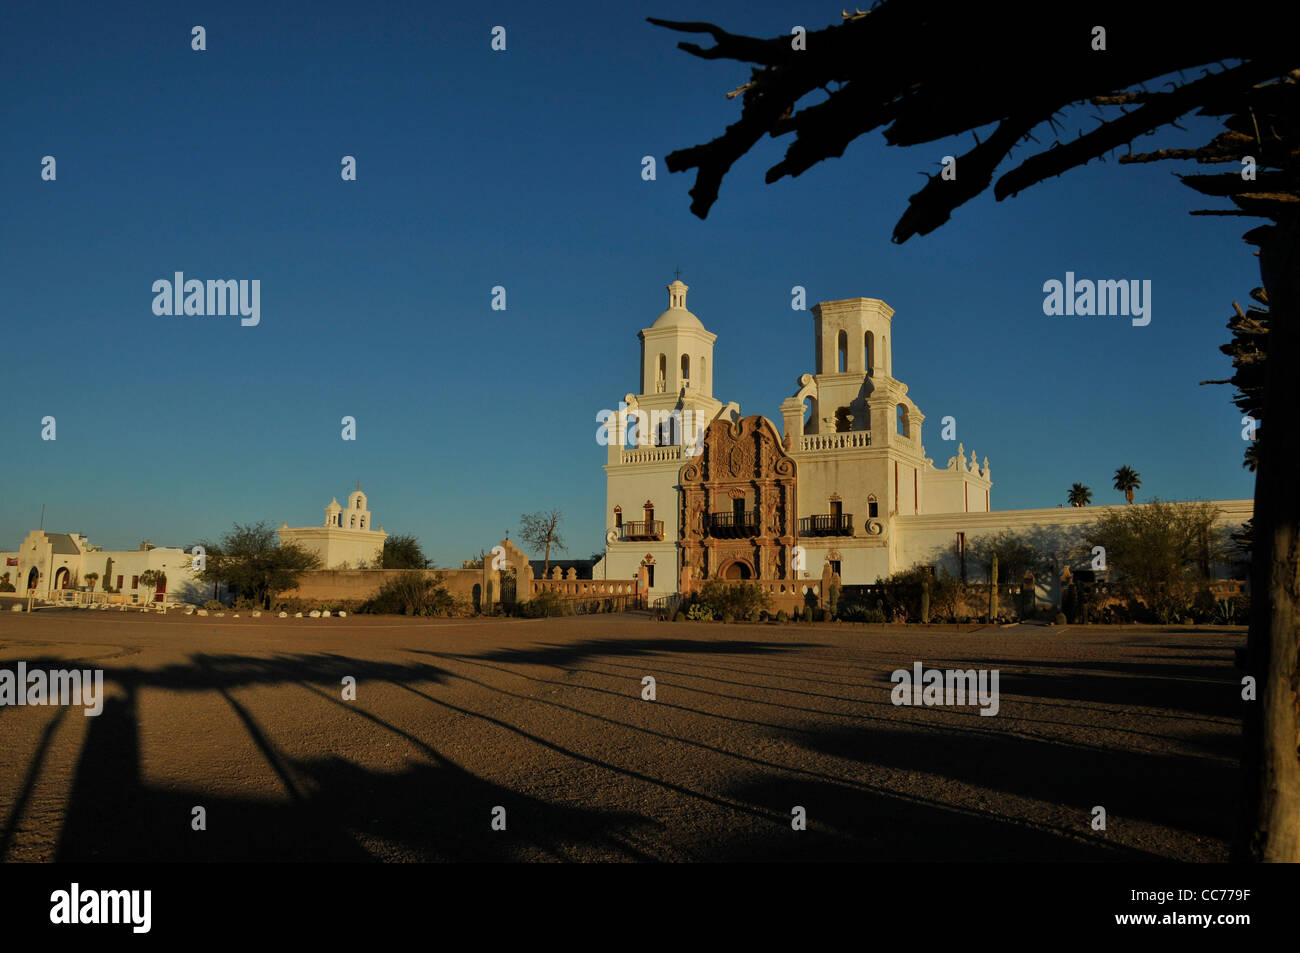 Mission San Xavier del Bac was founded by Father Eusebio Kino in 1692 in what is now Tucson, Arizona, USA. Stock Photo